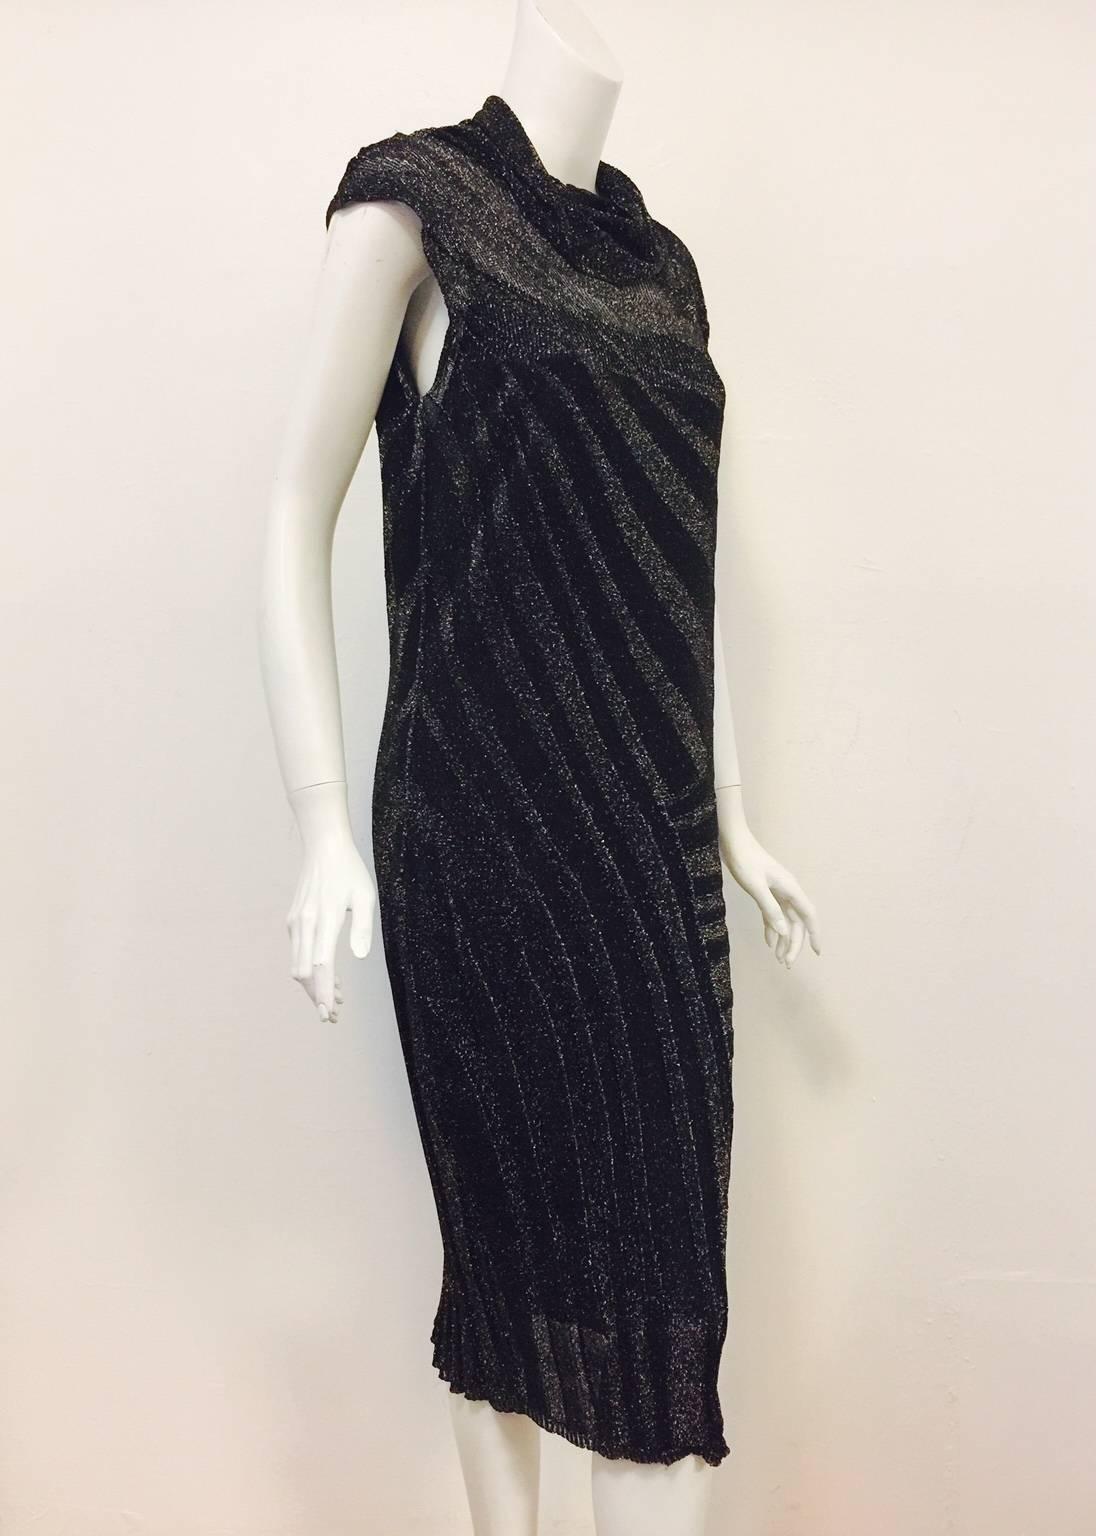 Women's New Escada Black and Gold Metallic Knit Cap Sleeve Dress With Cowl Neck